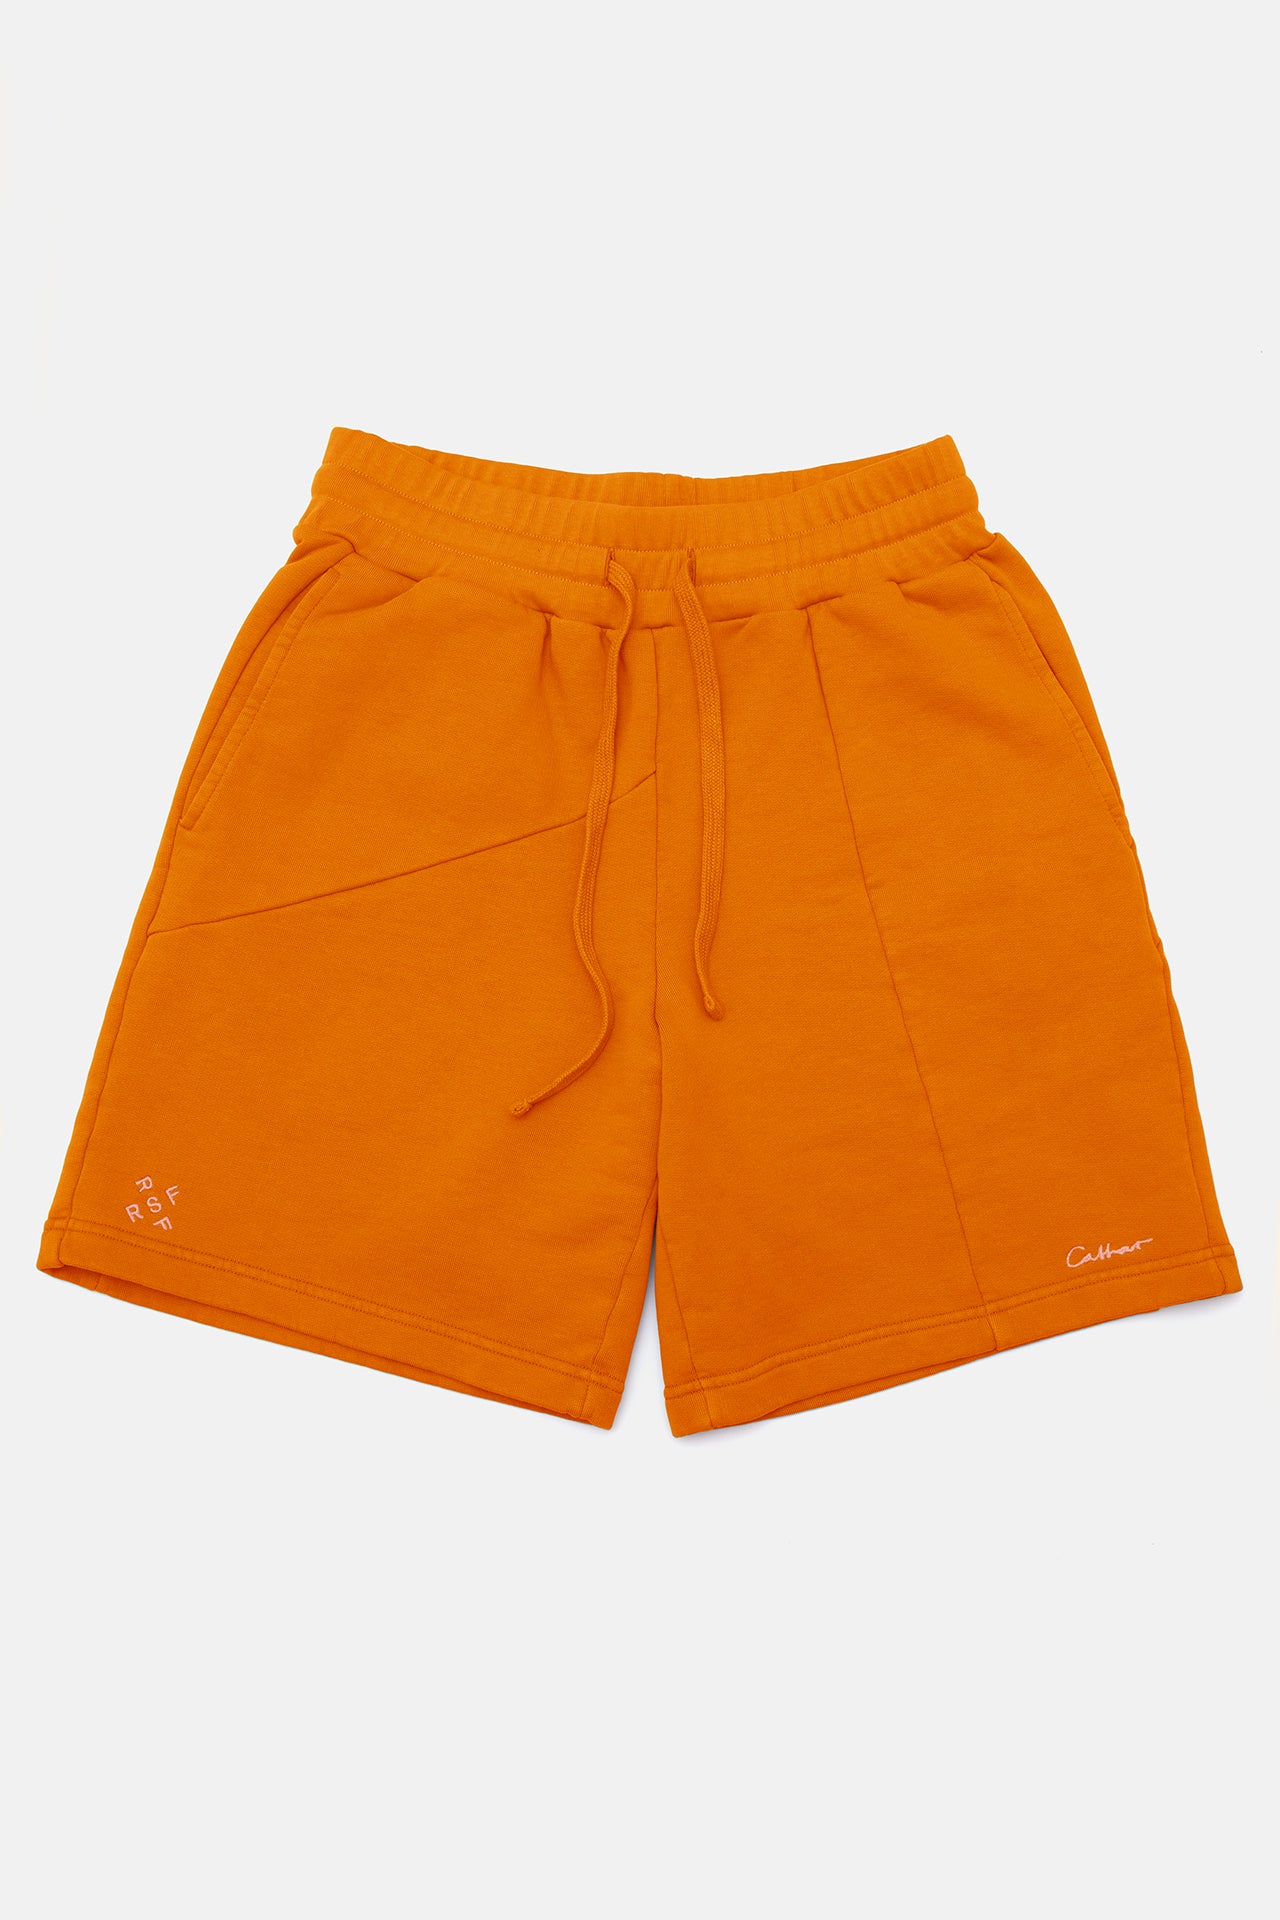 RSF x DC Deconstructed Terry Shorts Rusty Orange - Retrosuperfuture USA -